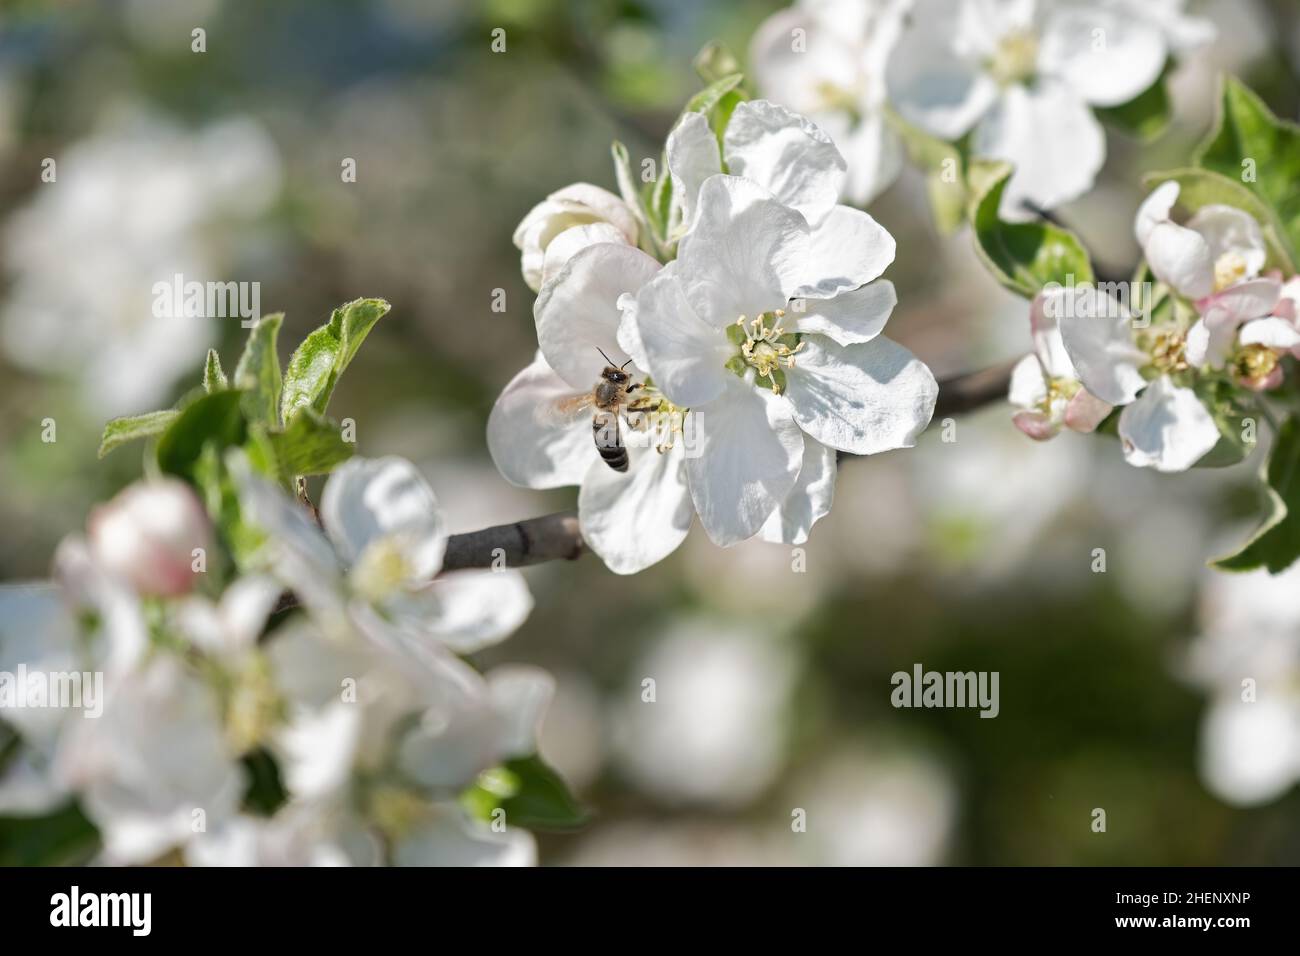 close up of  white blossoms on fruit tree with bee Stock Photo